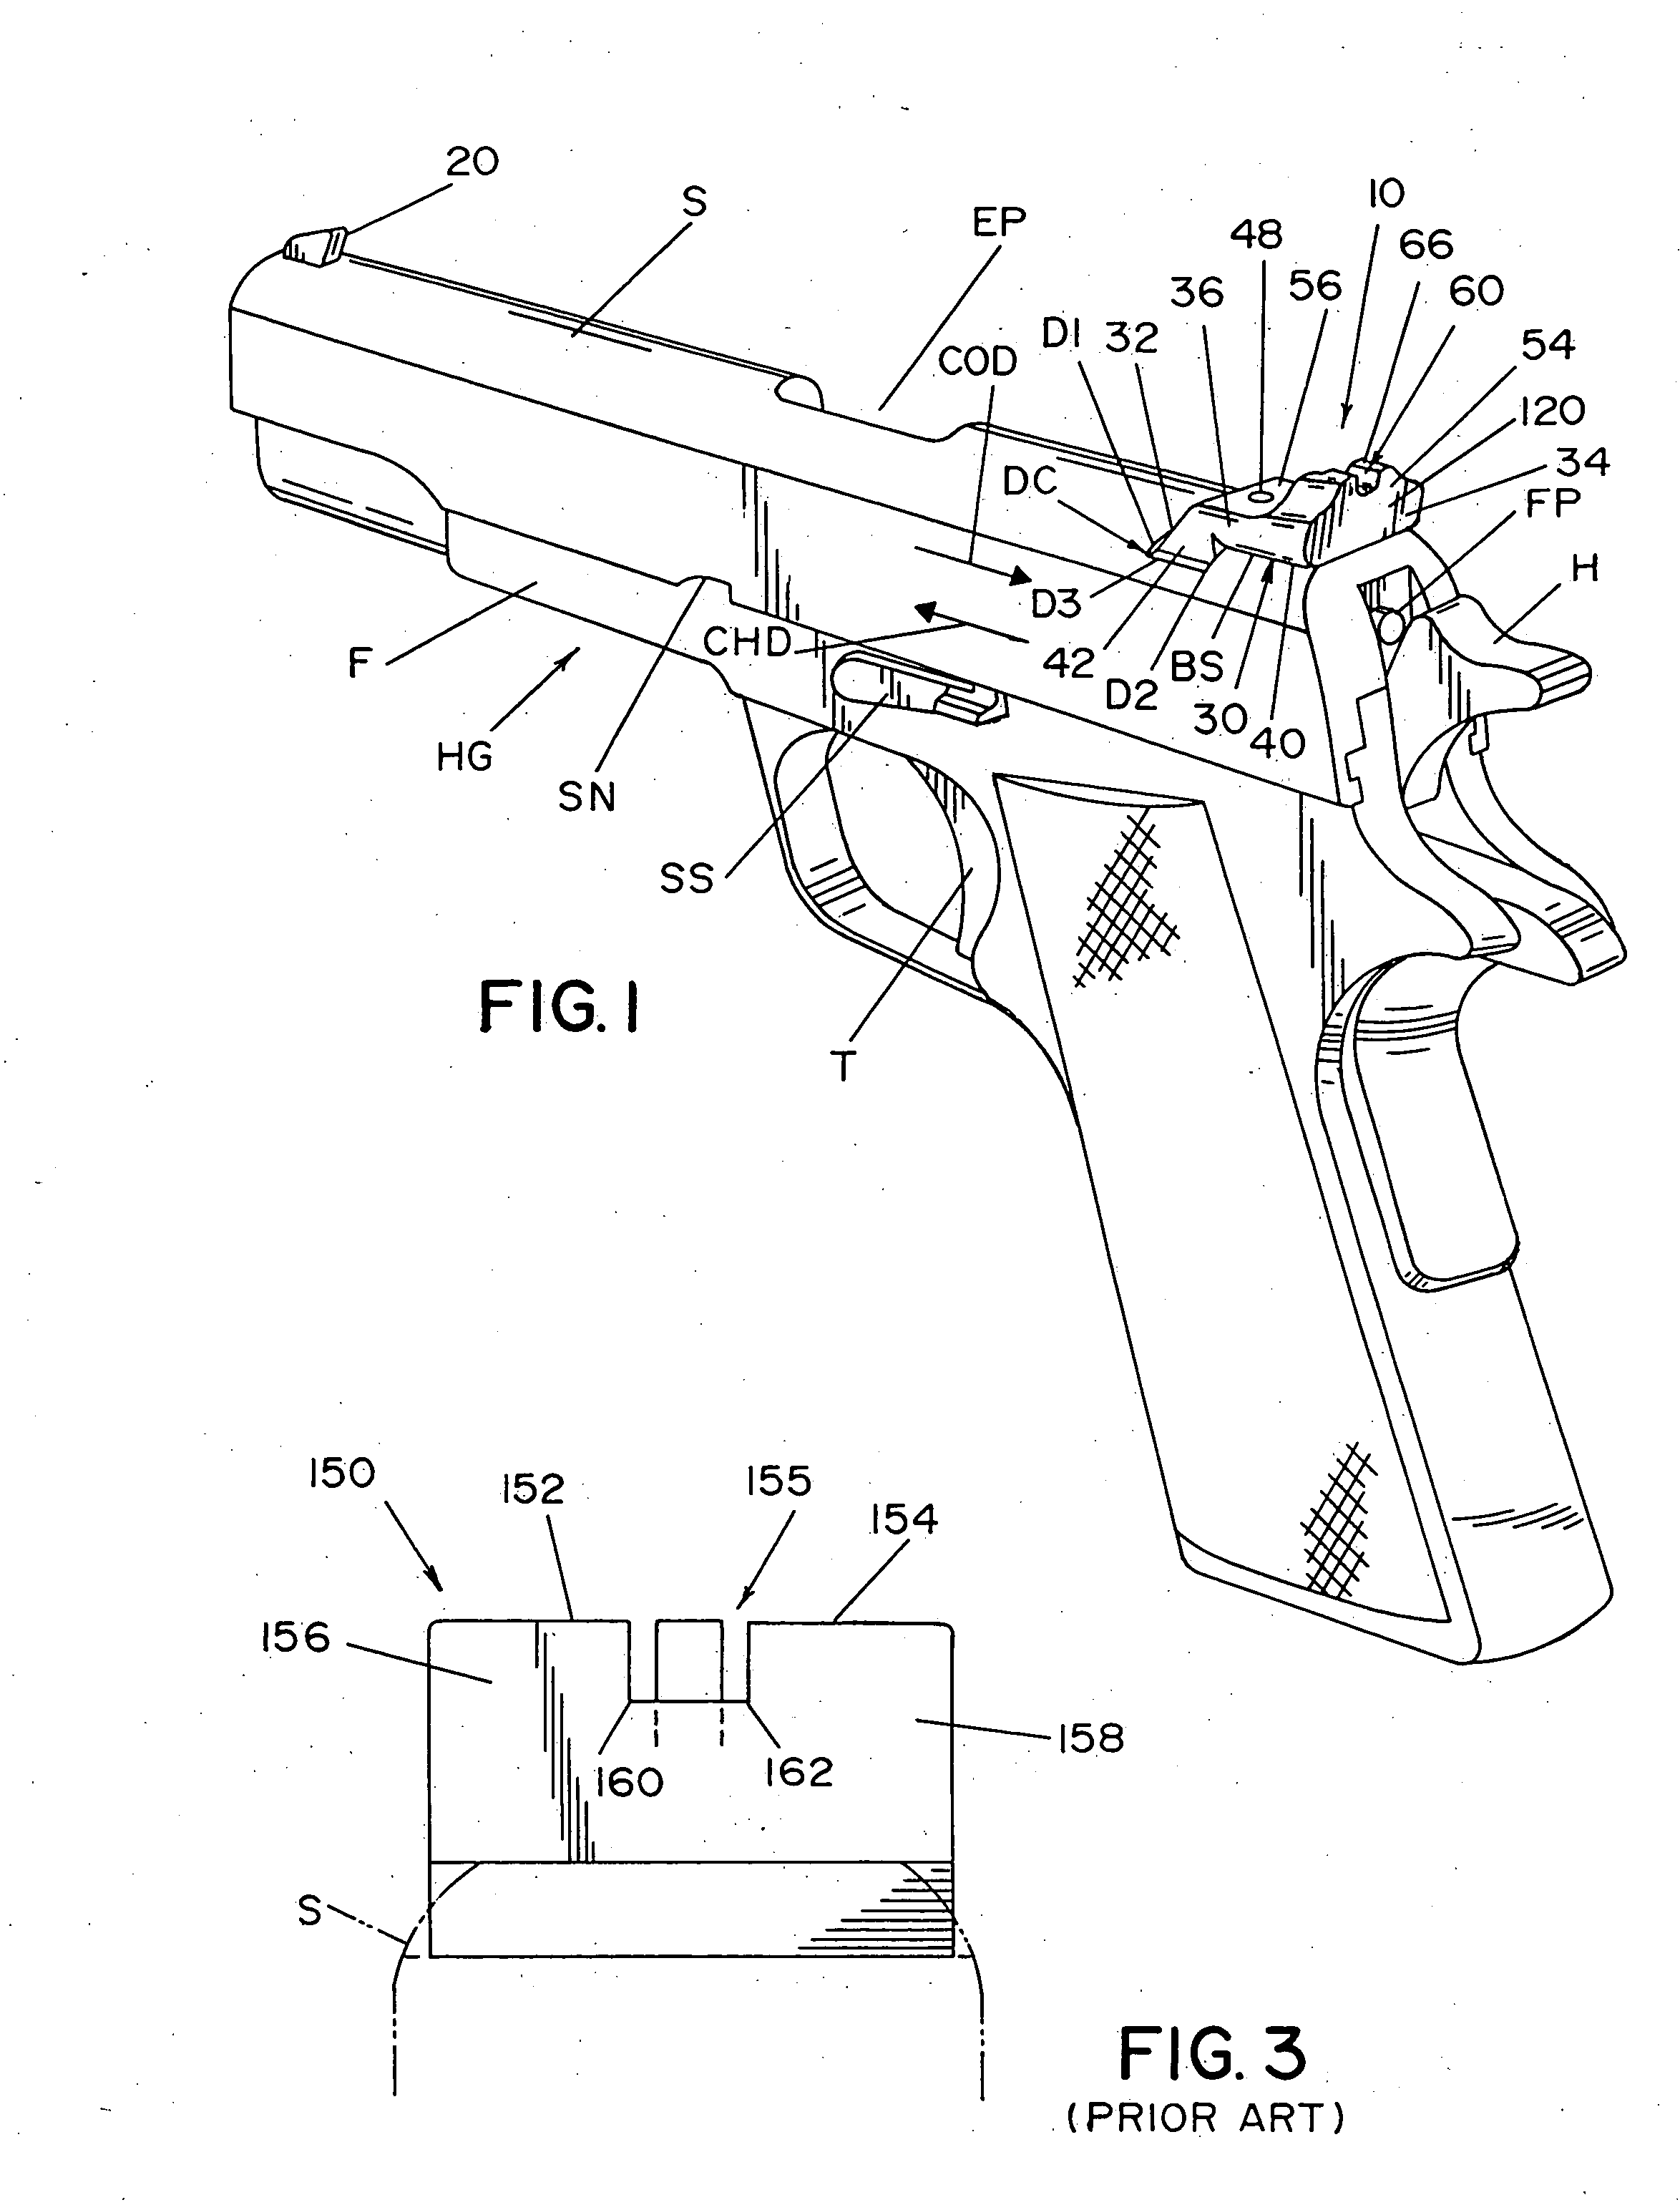 Tactical sight for a semi-automatic hand gun